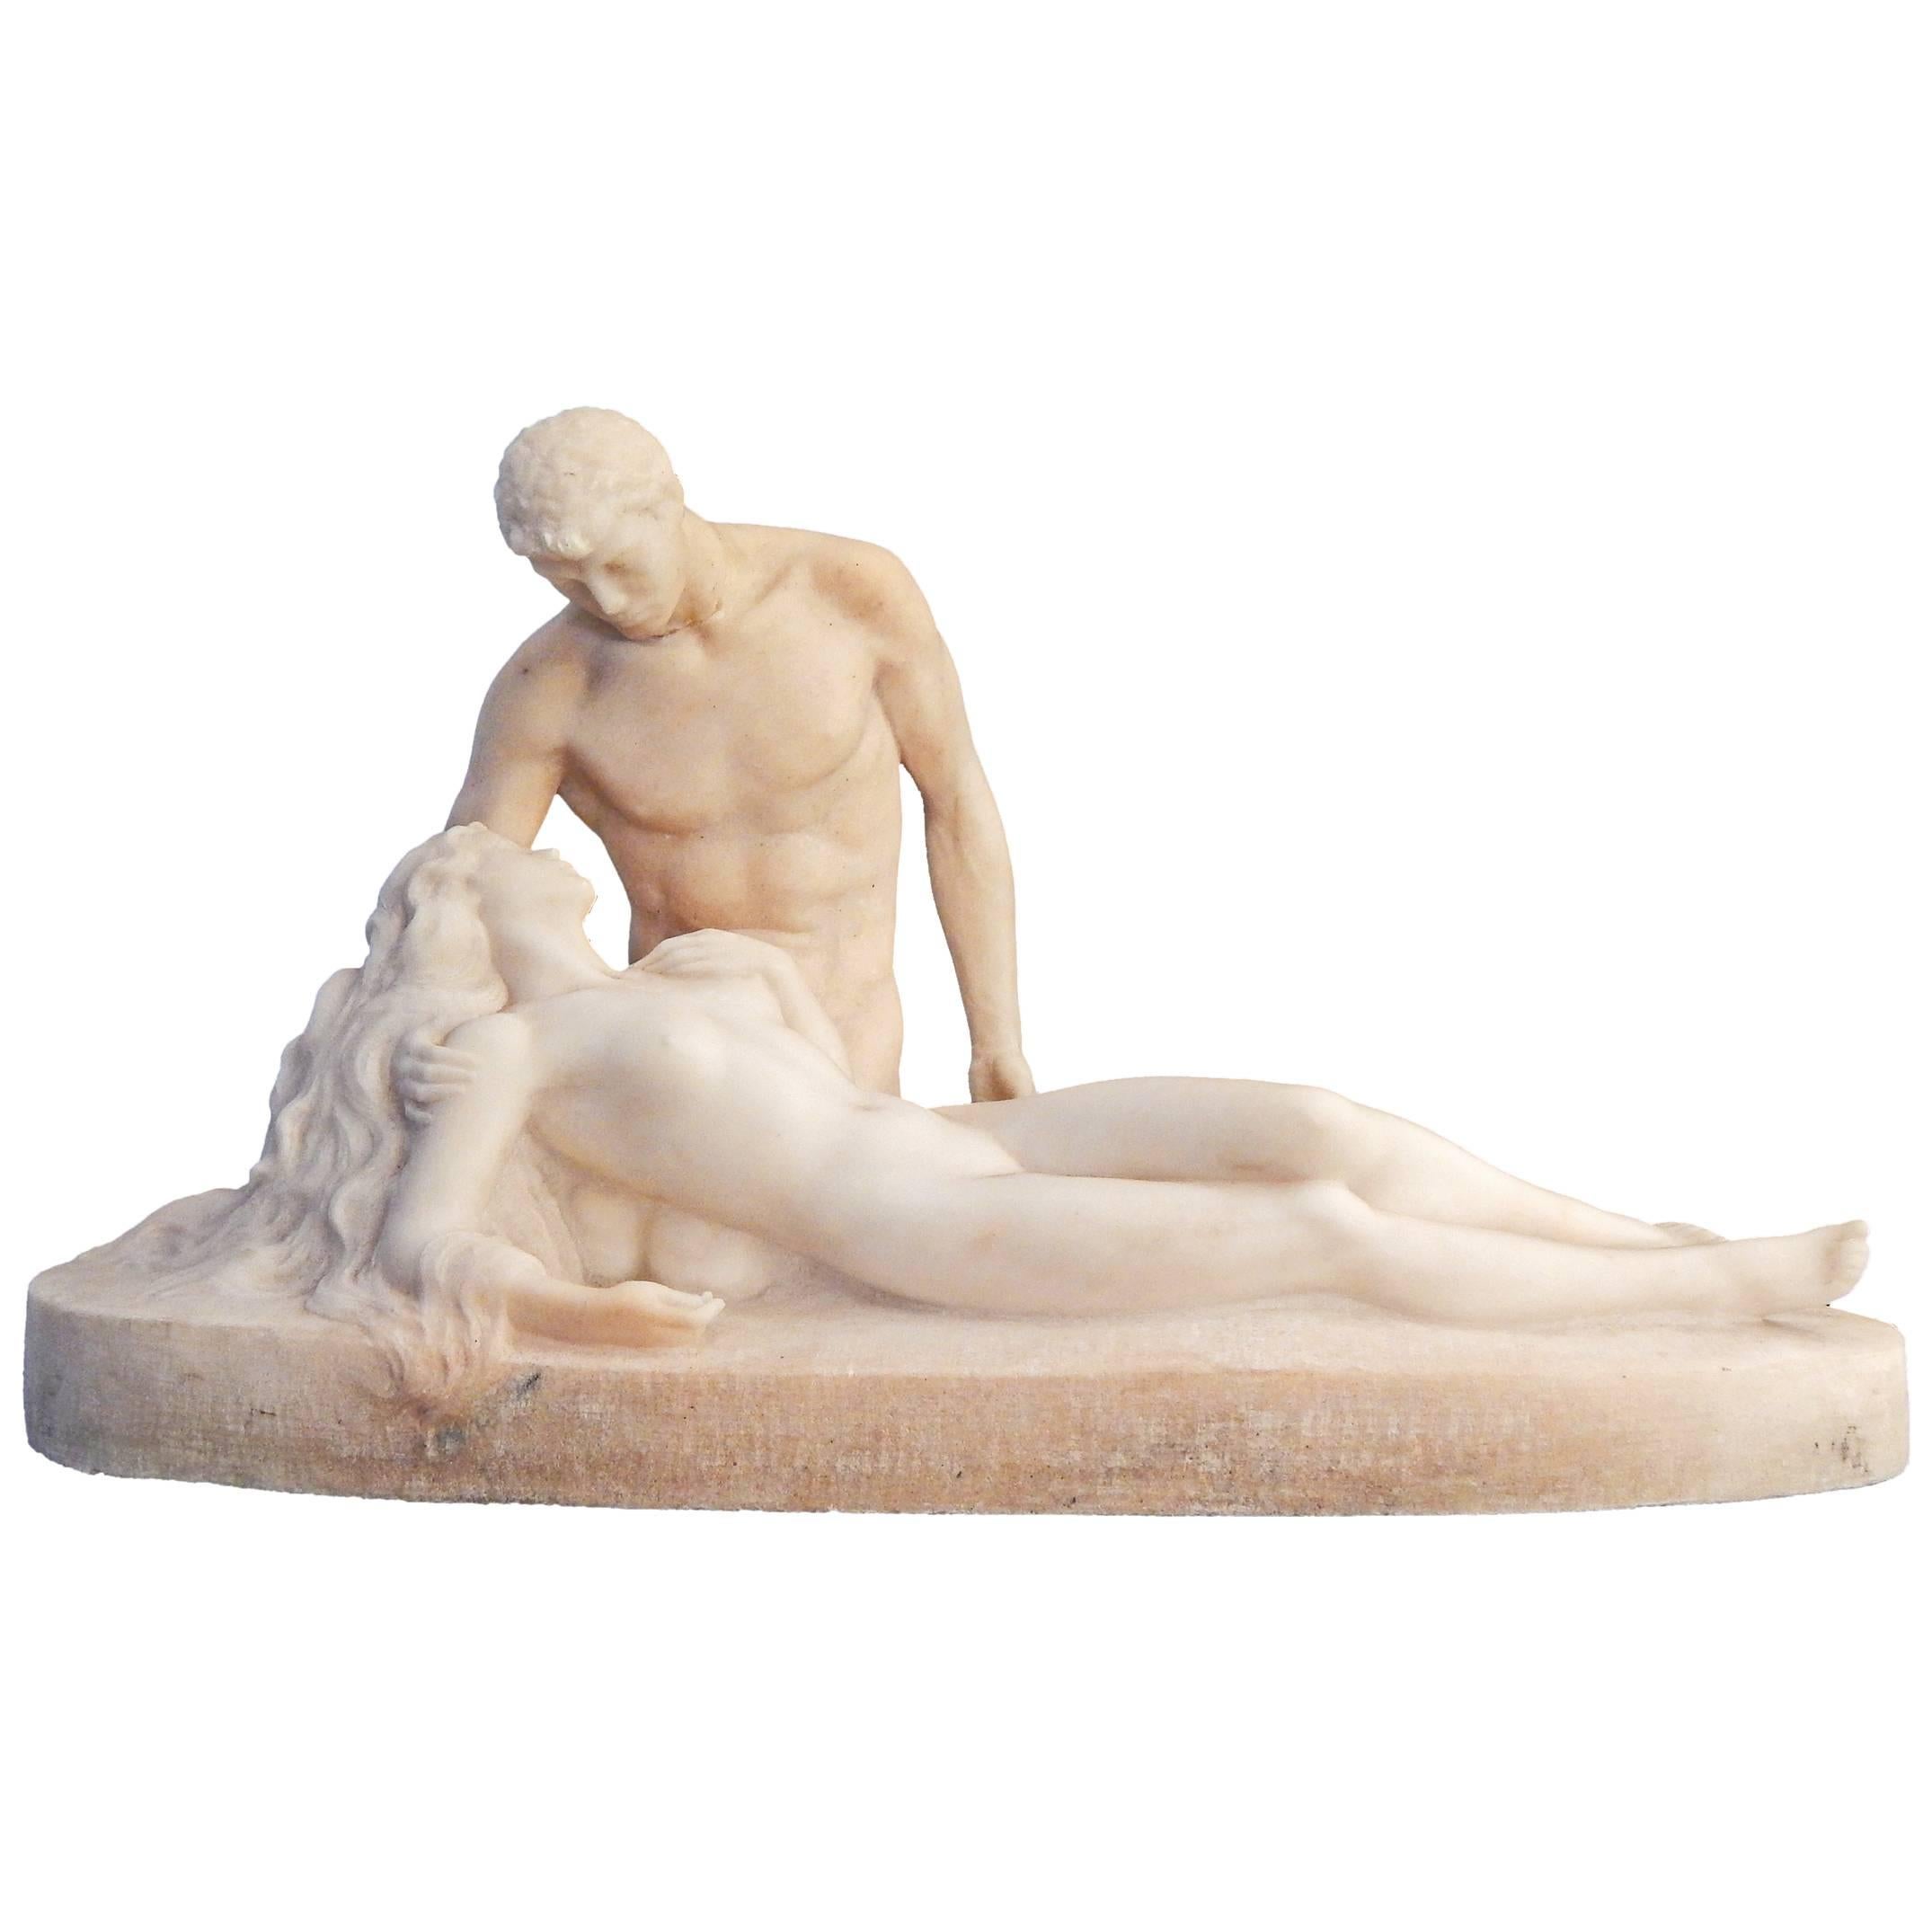 "Eternal Springtime, " Romantic Antique Sculpture in Marble with Nudes by Kalish